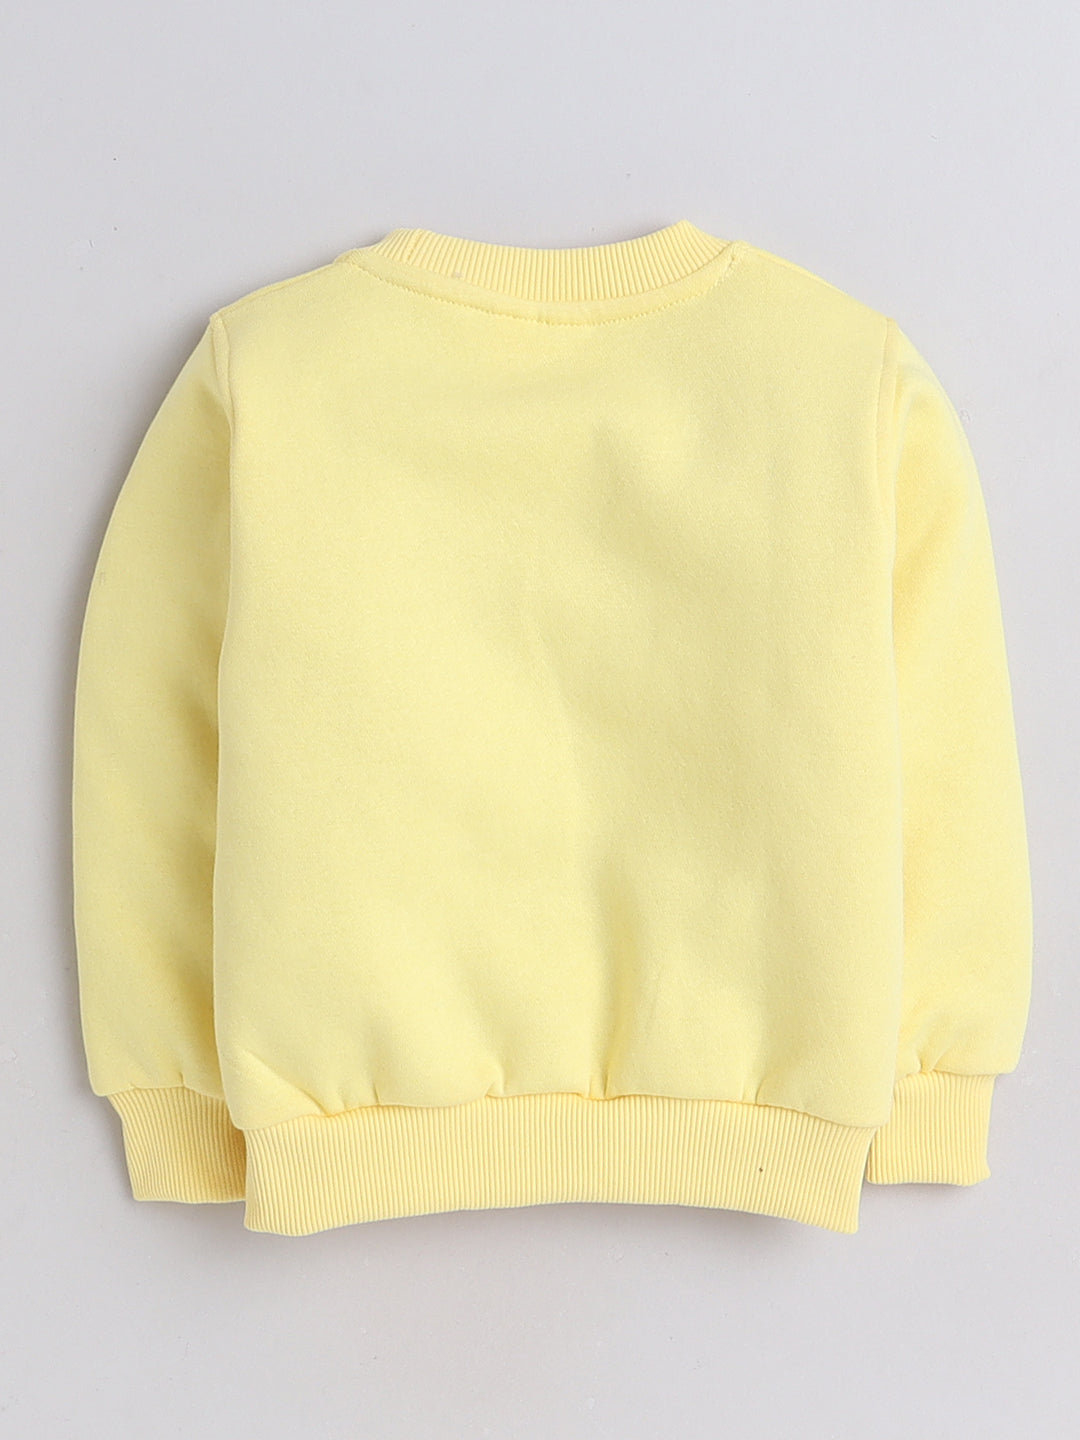 Knitting Doodles Kid's Sweatshirt with Warm Fleece and Pocket in front- Light Yellow